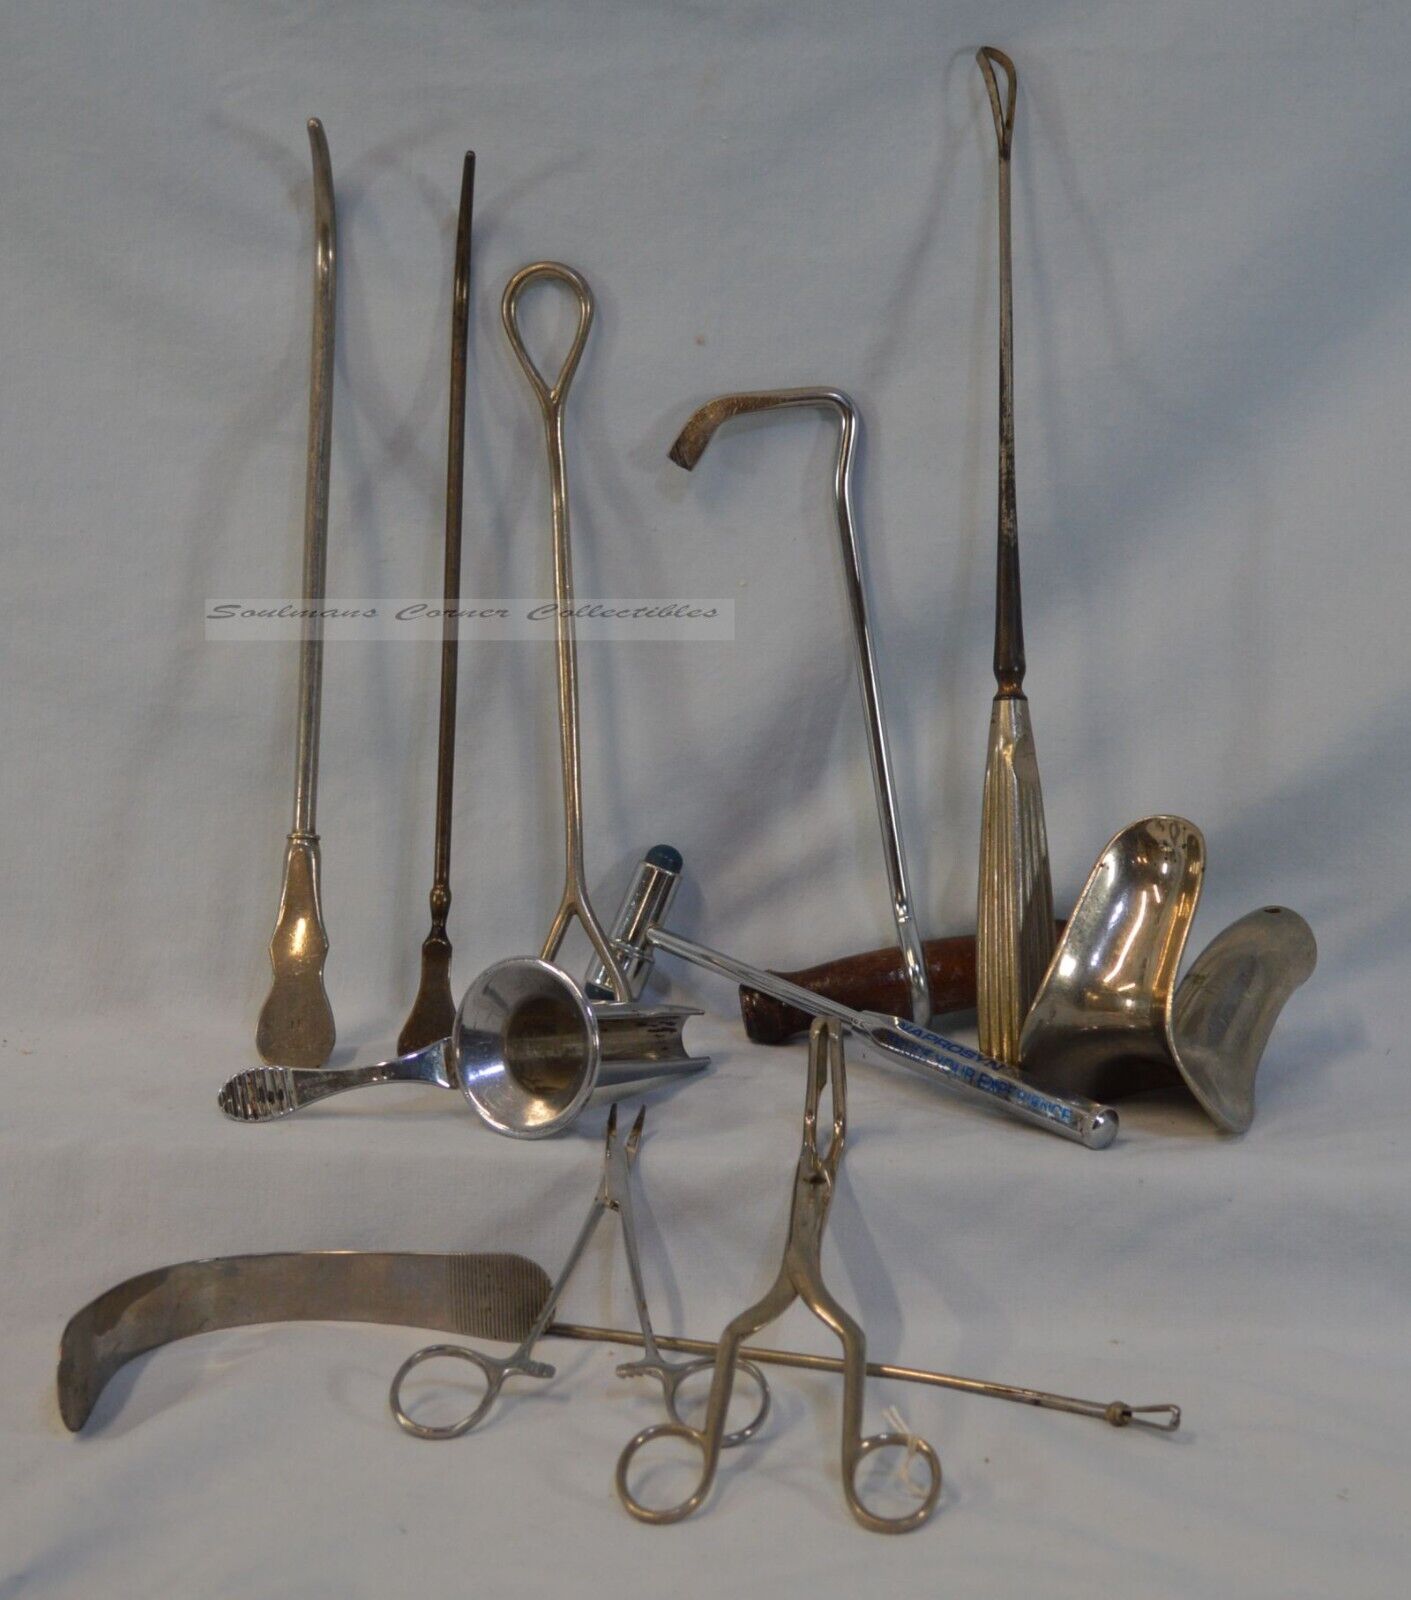 Great Batch of Vintage Medical Tools Instruments Very Collectible Great Decor